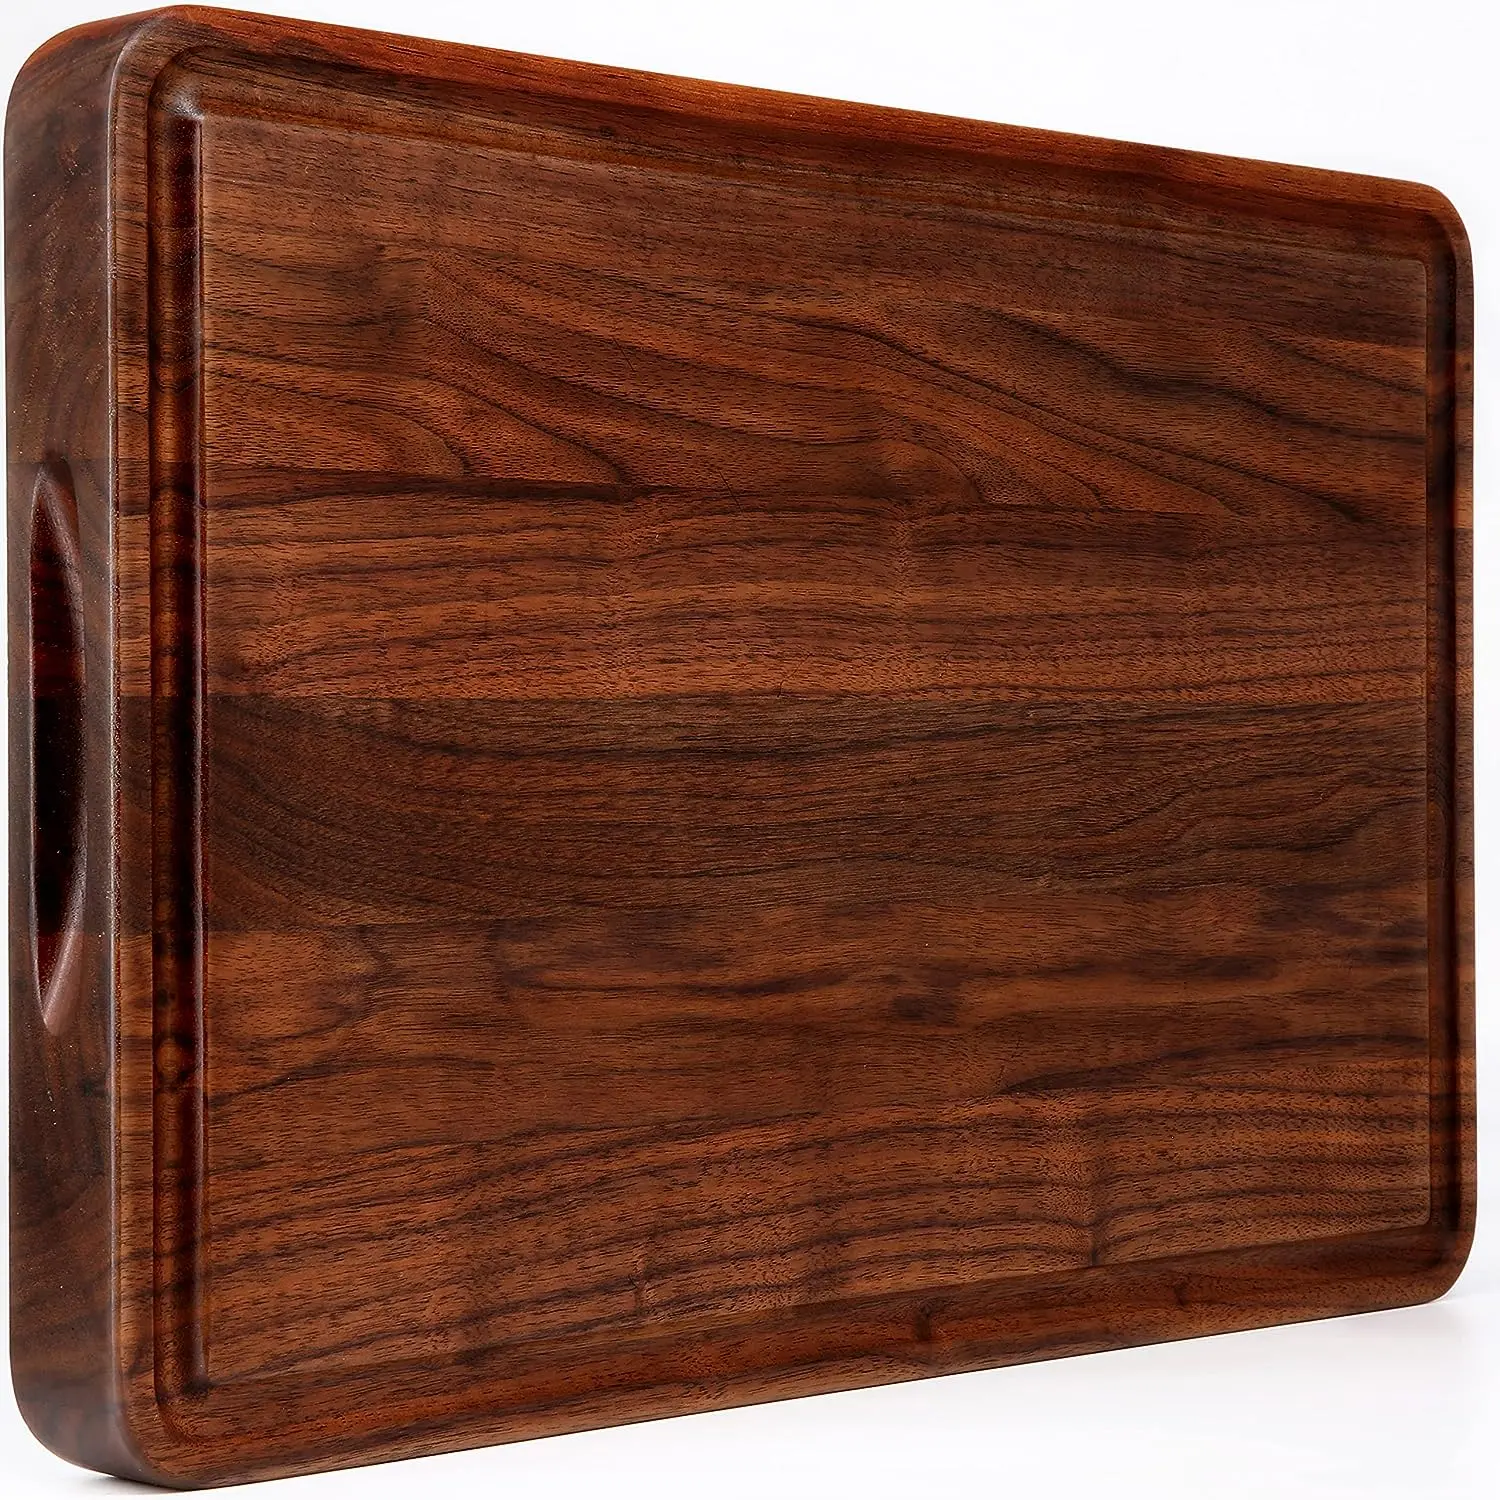 Large Walnut Chopping Board with Handle for Any Kind of Meat Fruits and Vegetables Natural Wooden Cutting Boards